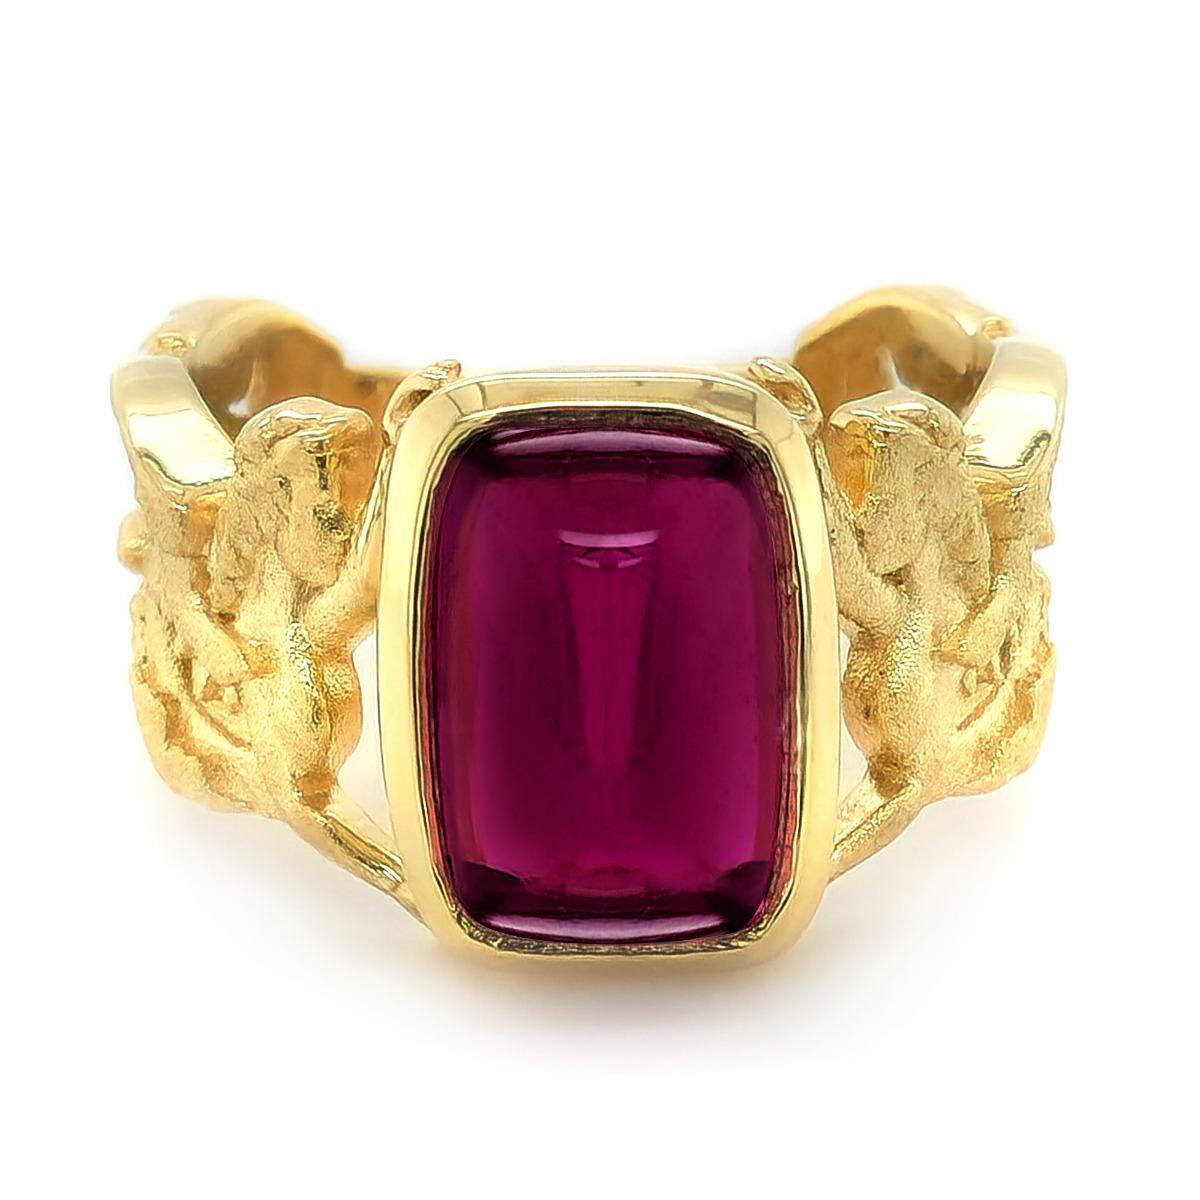 Certified 5.17 Carat Rubellite Diamonds set in 18K Yellow Gold Ring In New Condition For Sale In Los Angeles, CA